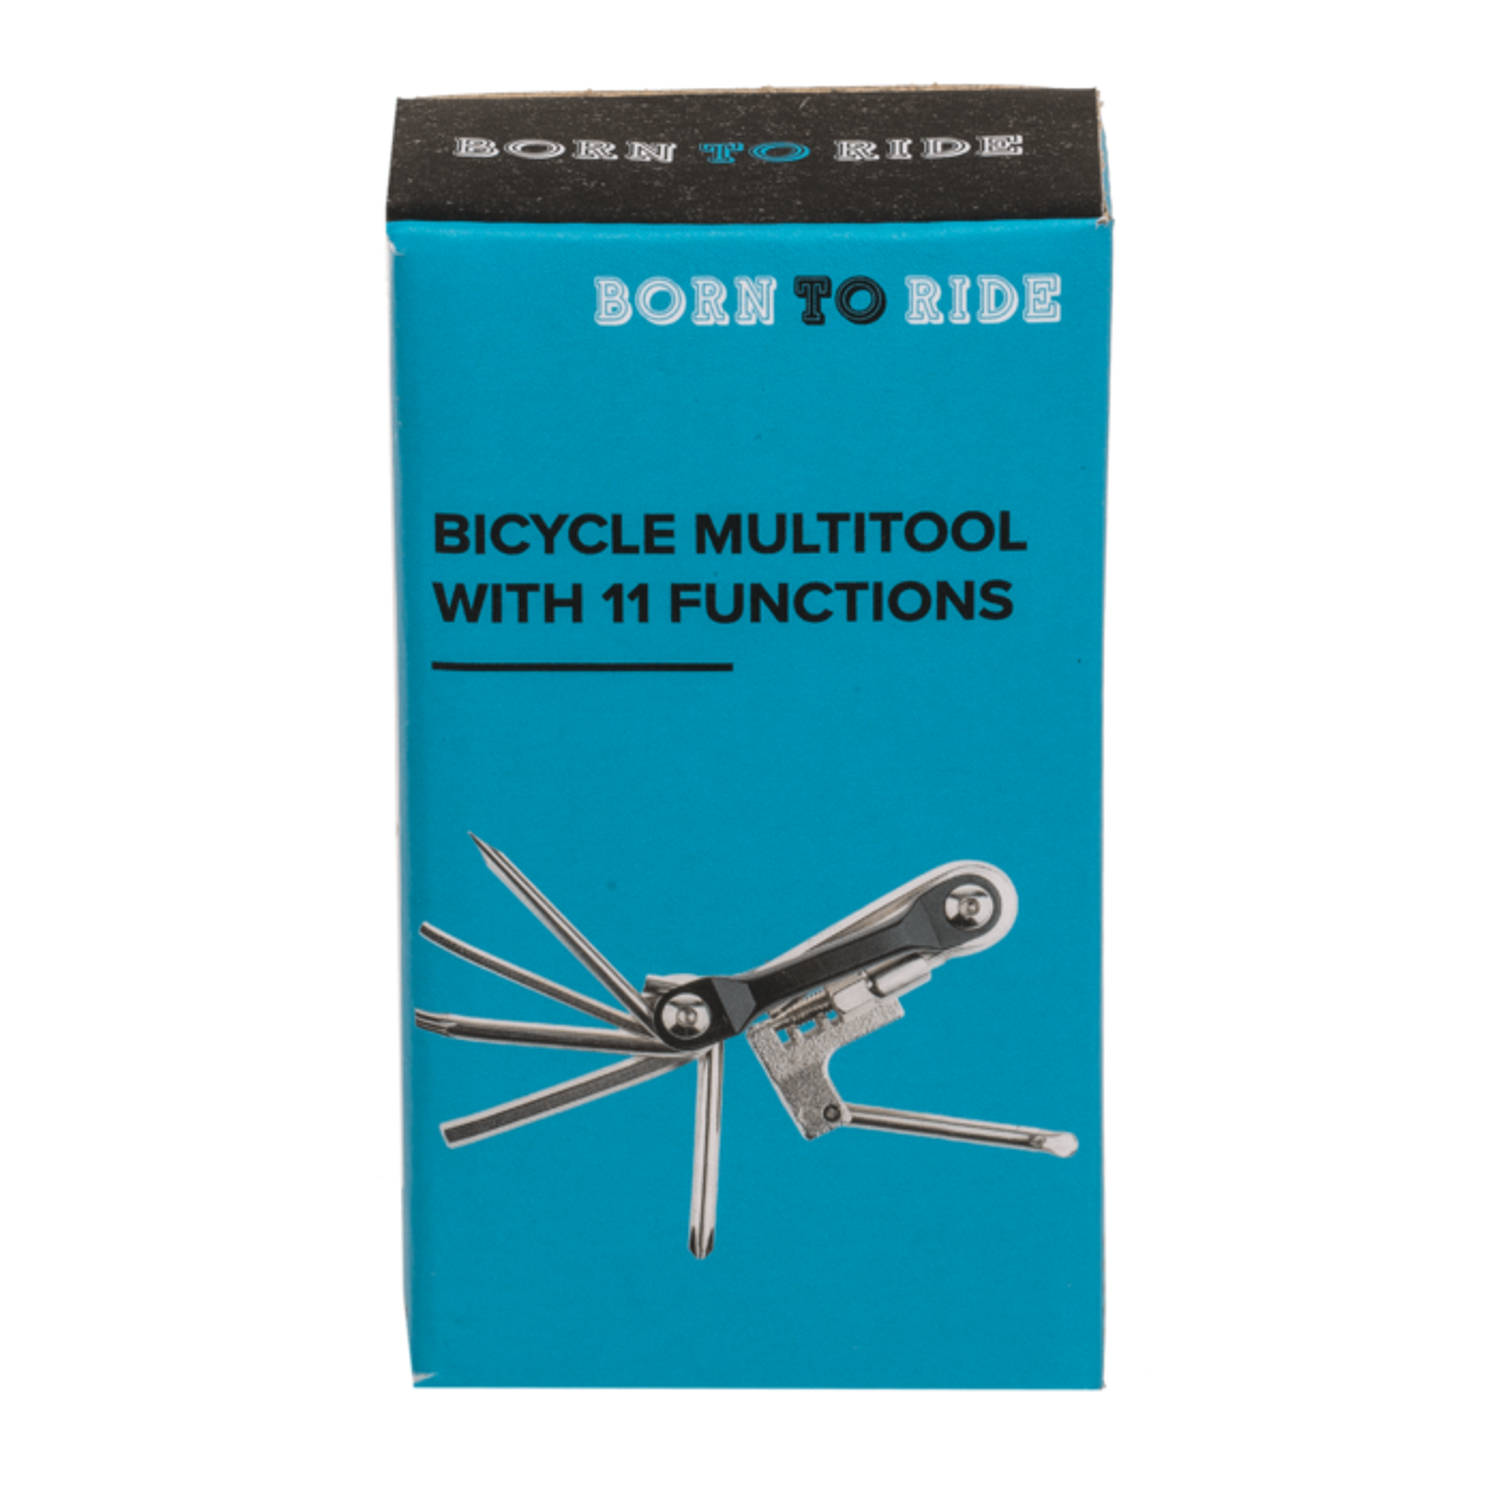 Bicycle multitool with 11 functions